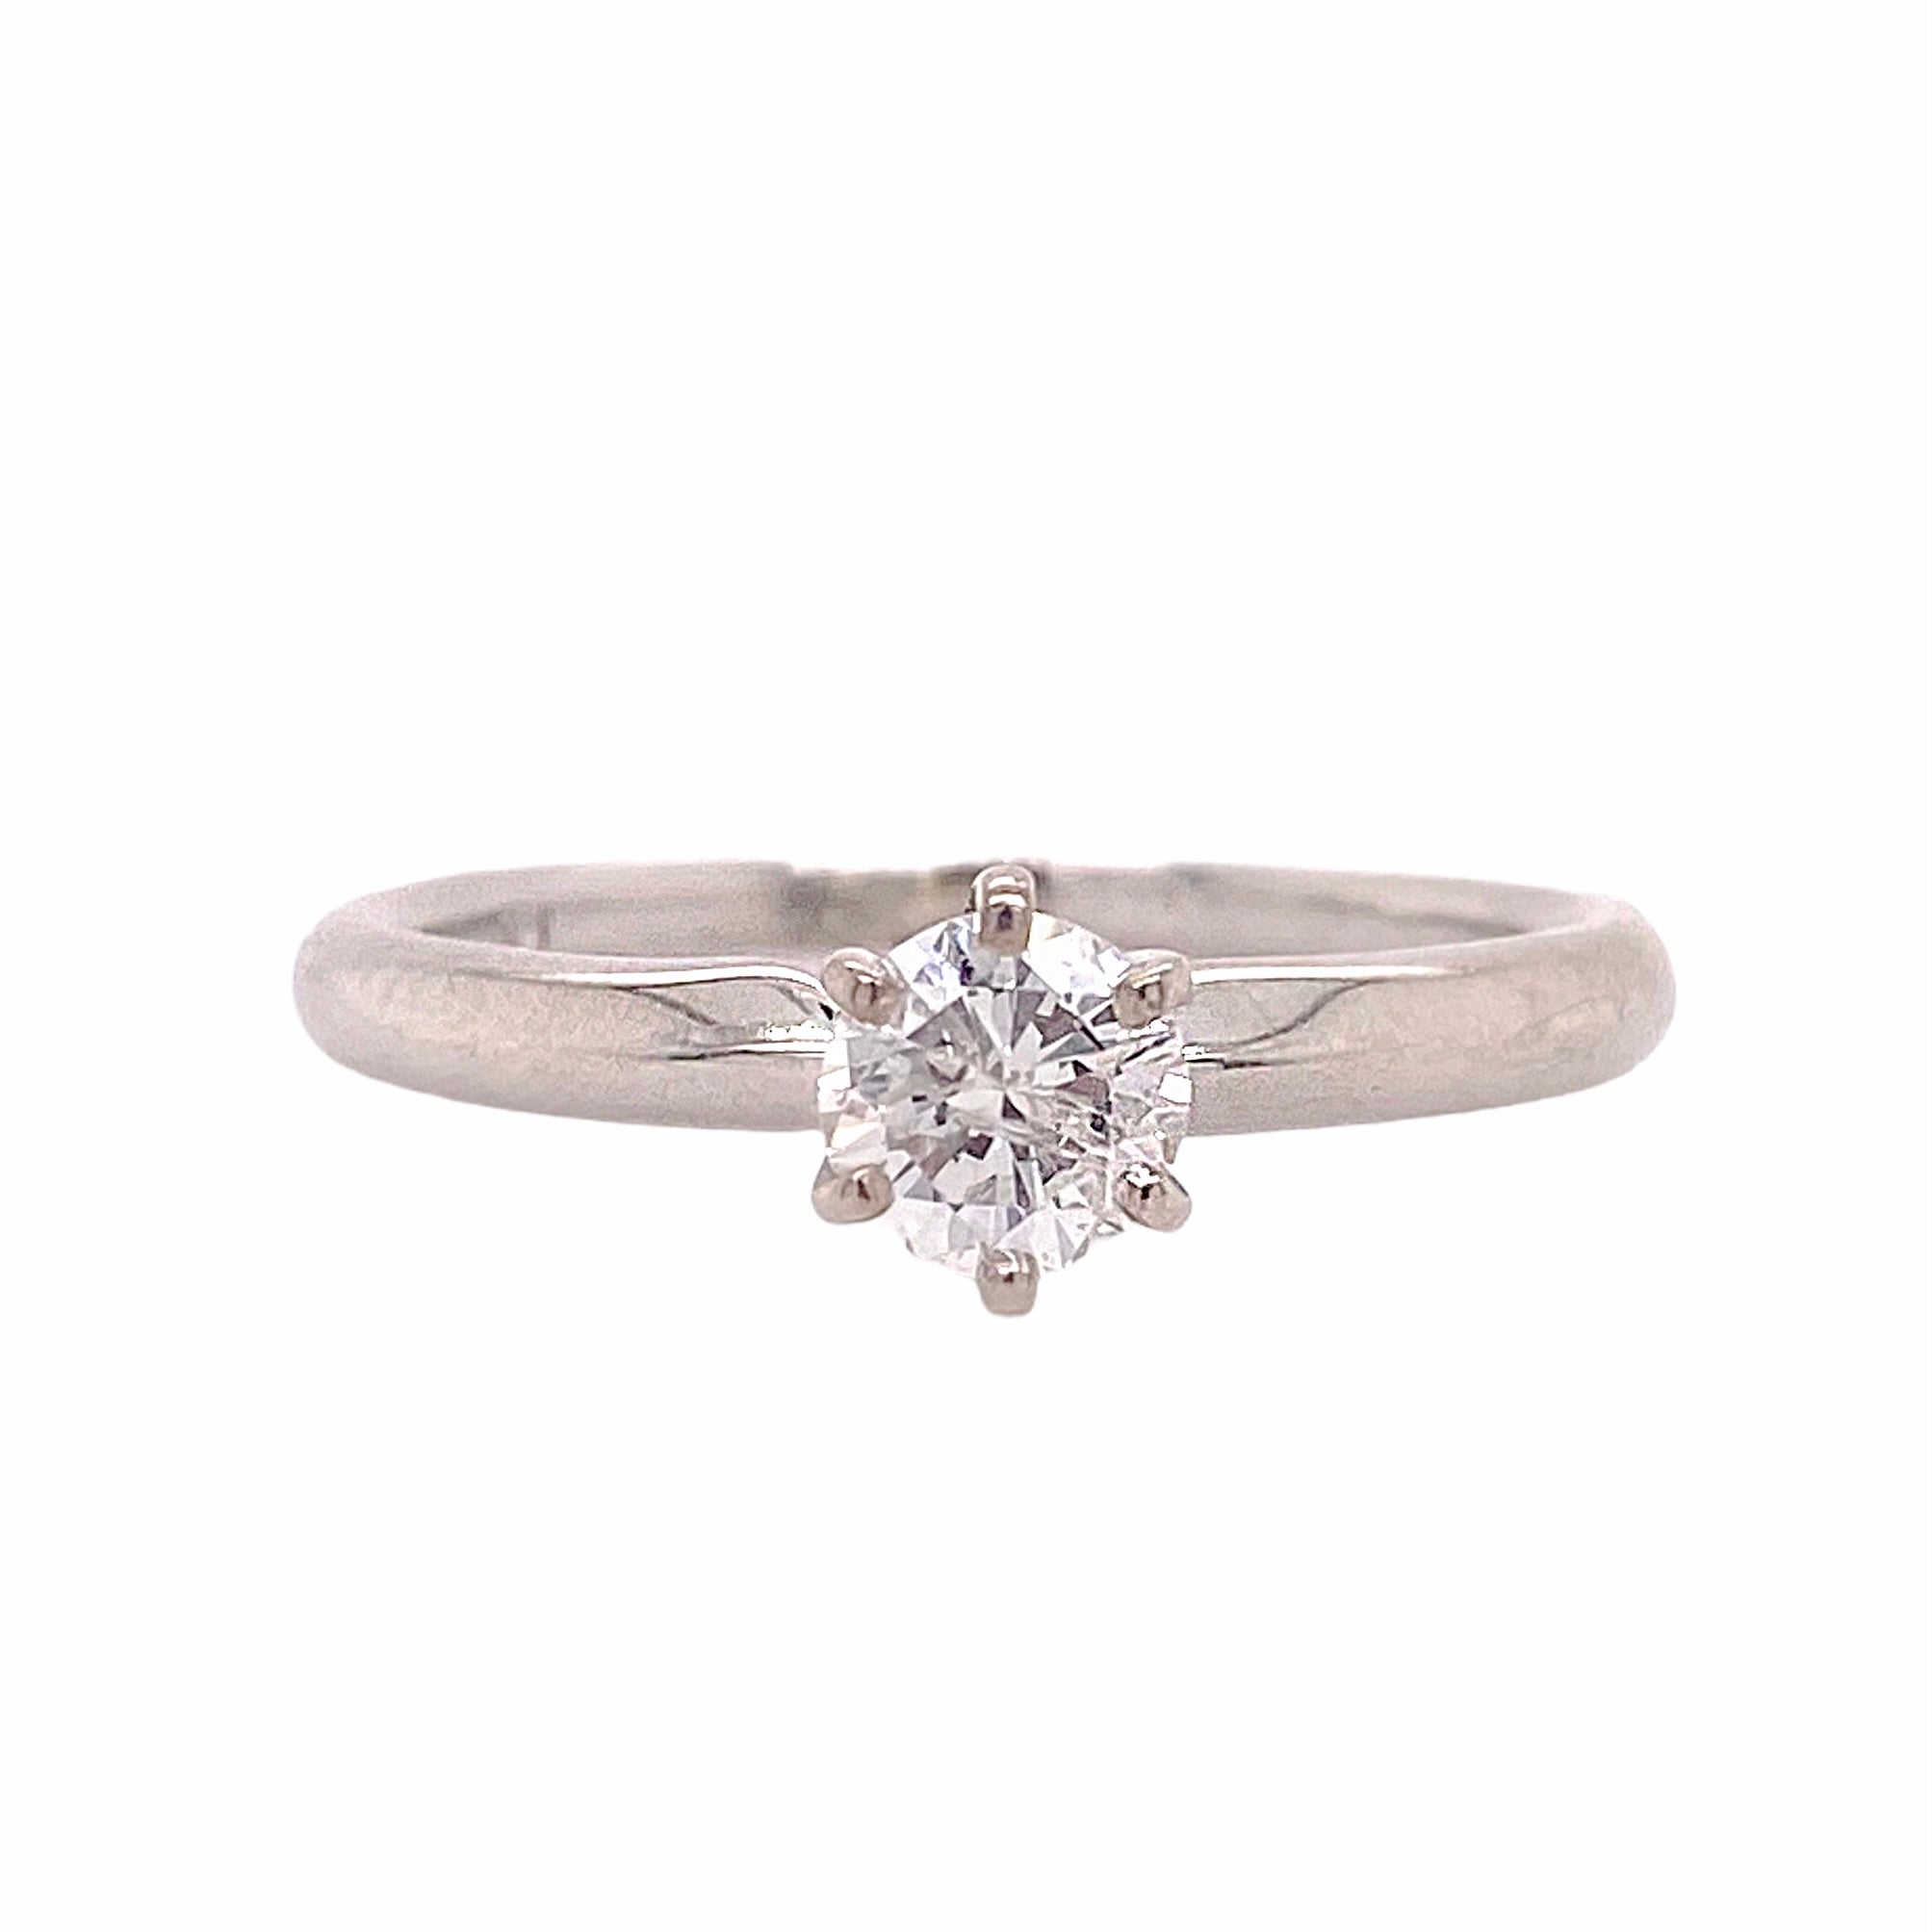 Solitaire diamond engagement ring, 6 prong setting 